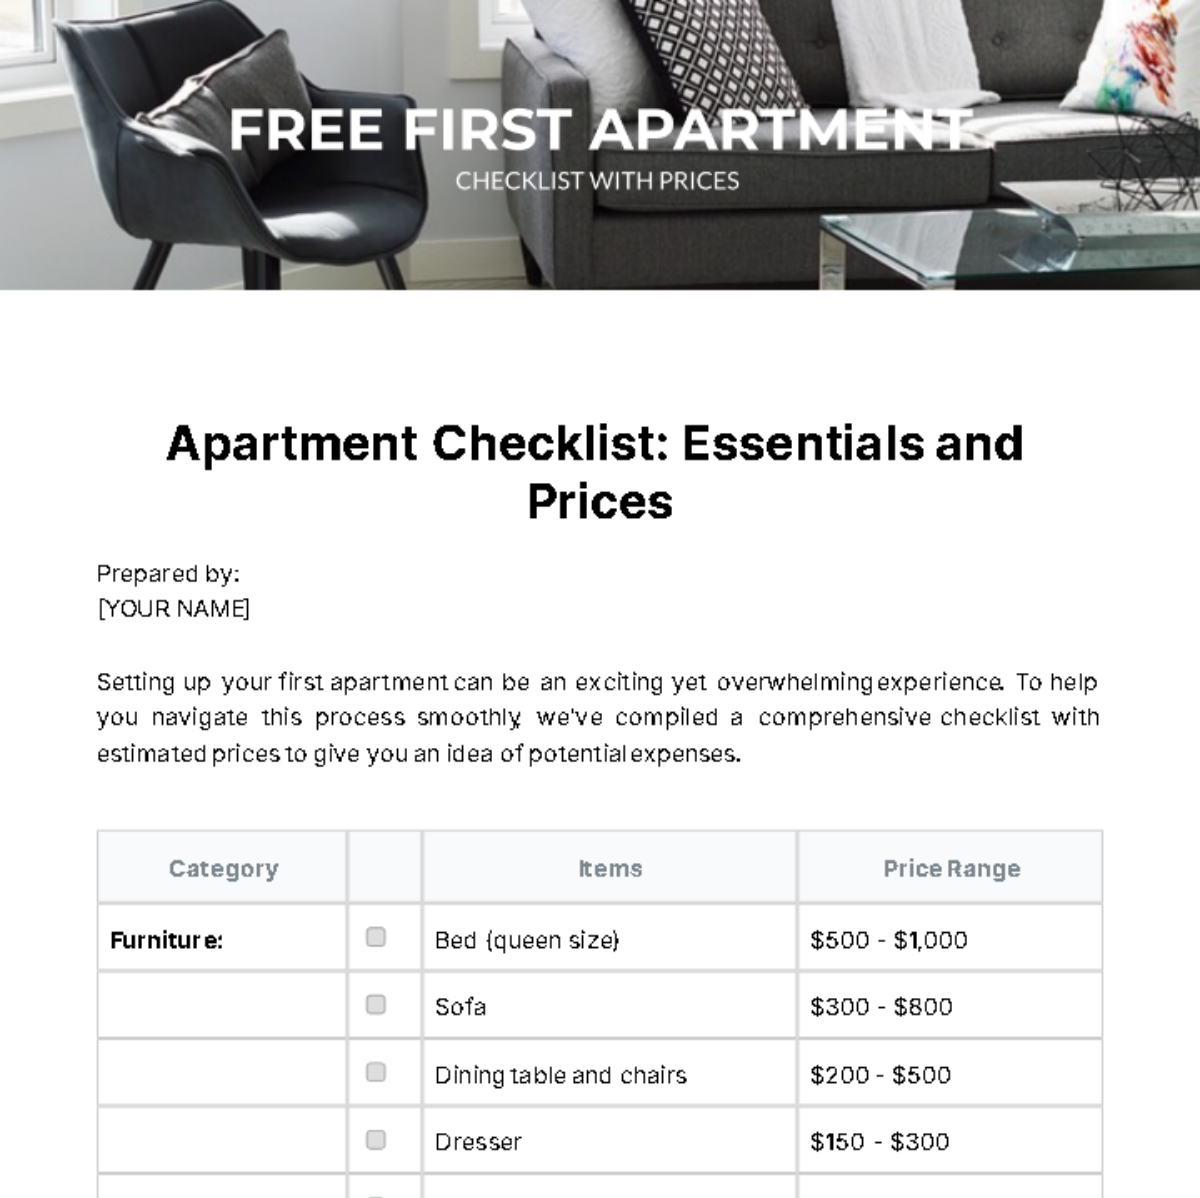 First Apartment Checklist With Prices Template